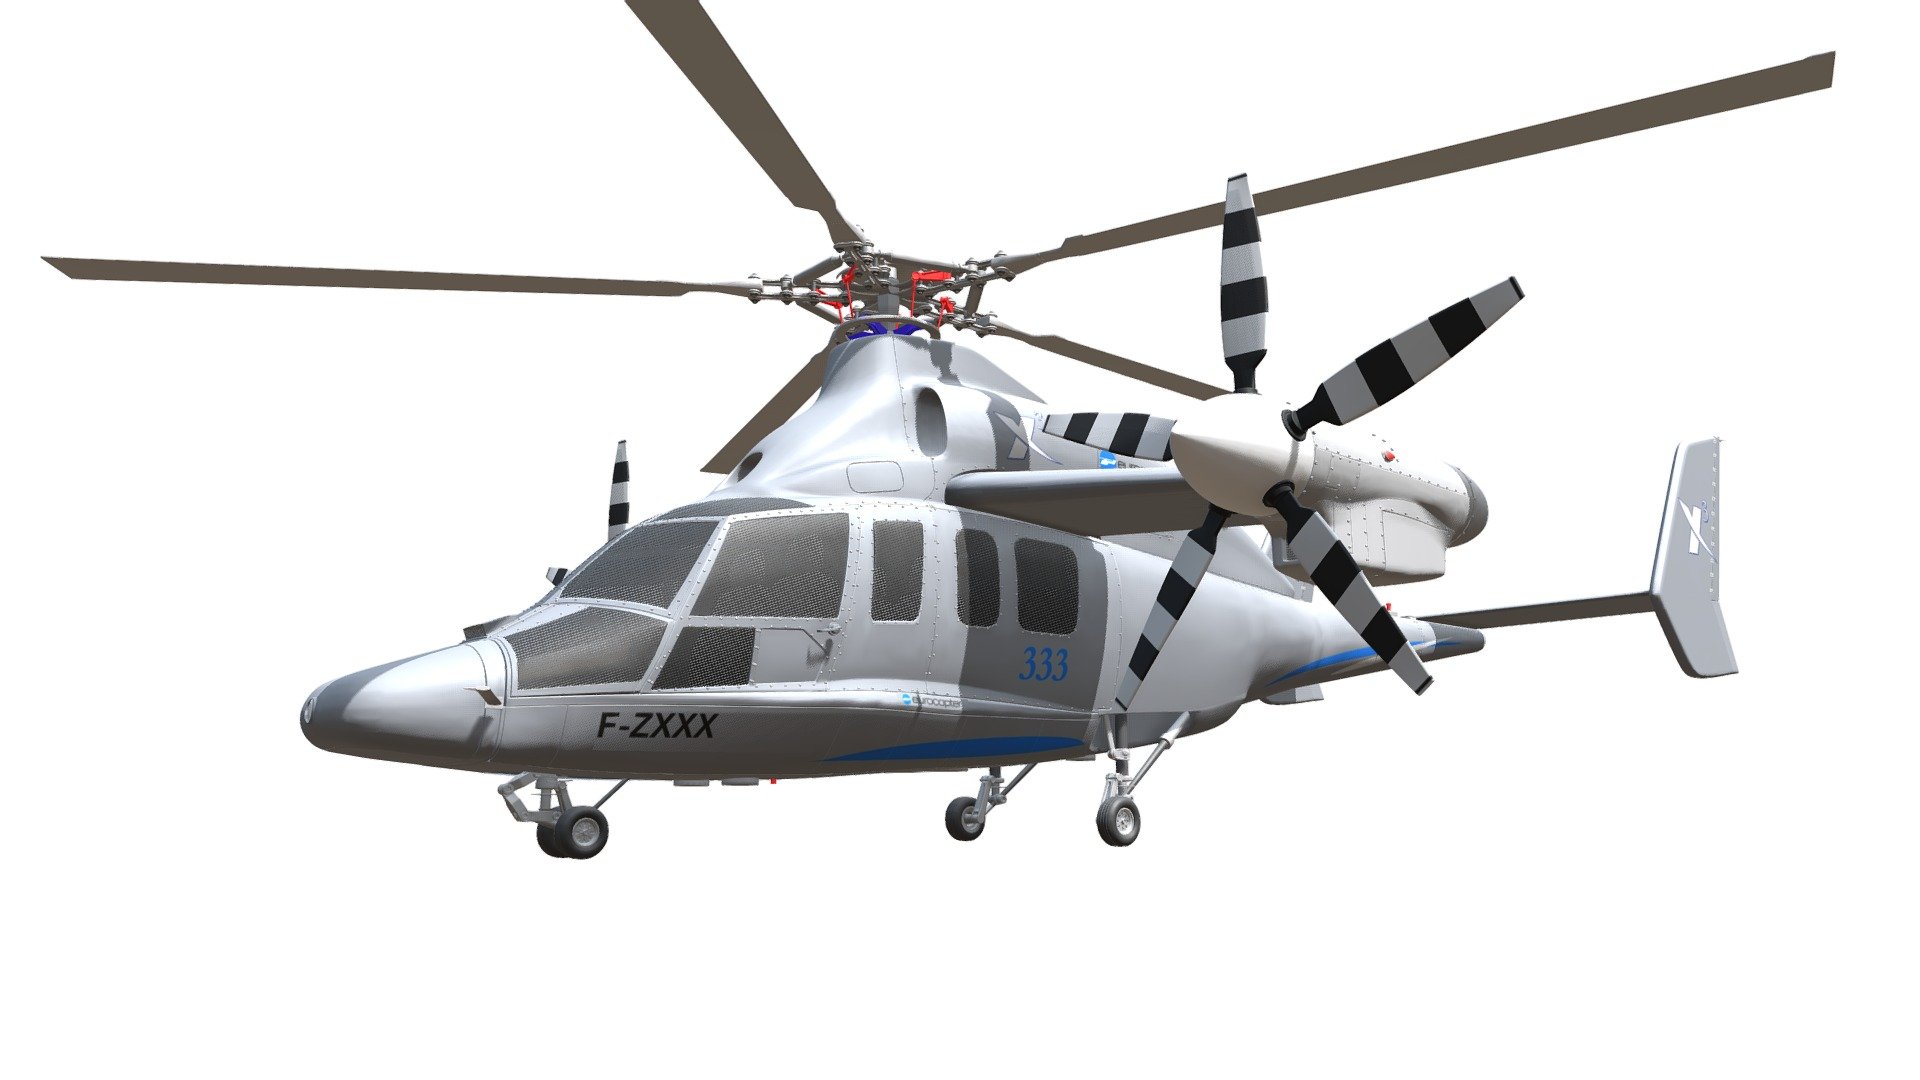 Detailed 3d model of Eurocopter X3 helicopter, comes with semi-detailed interior 3d model